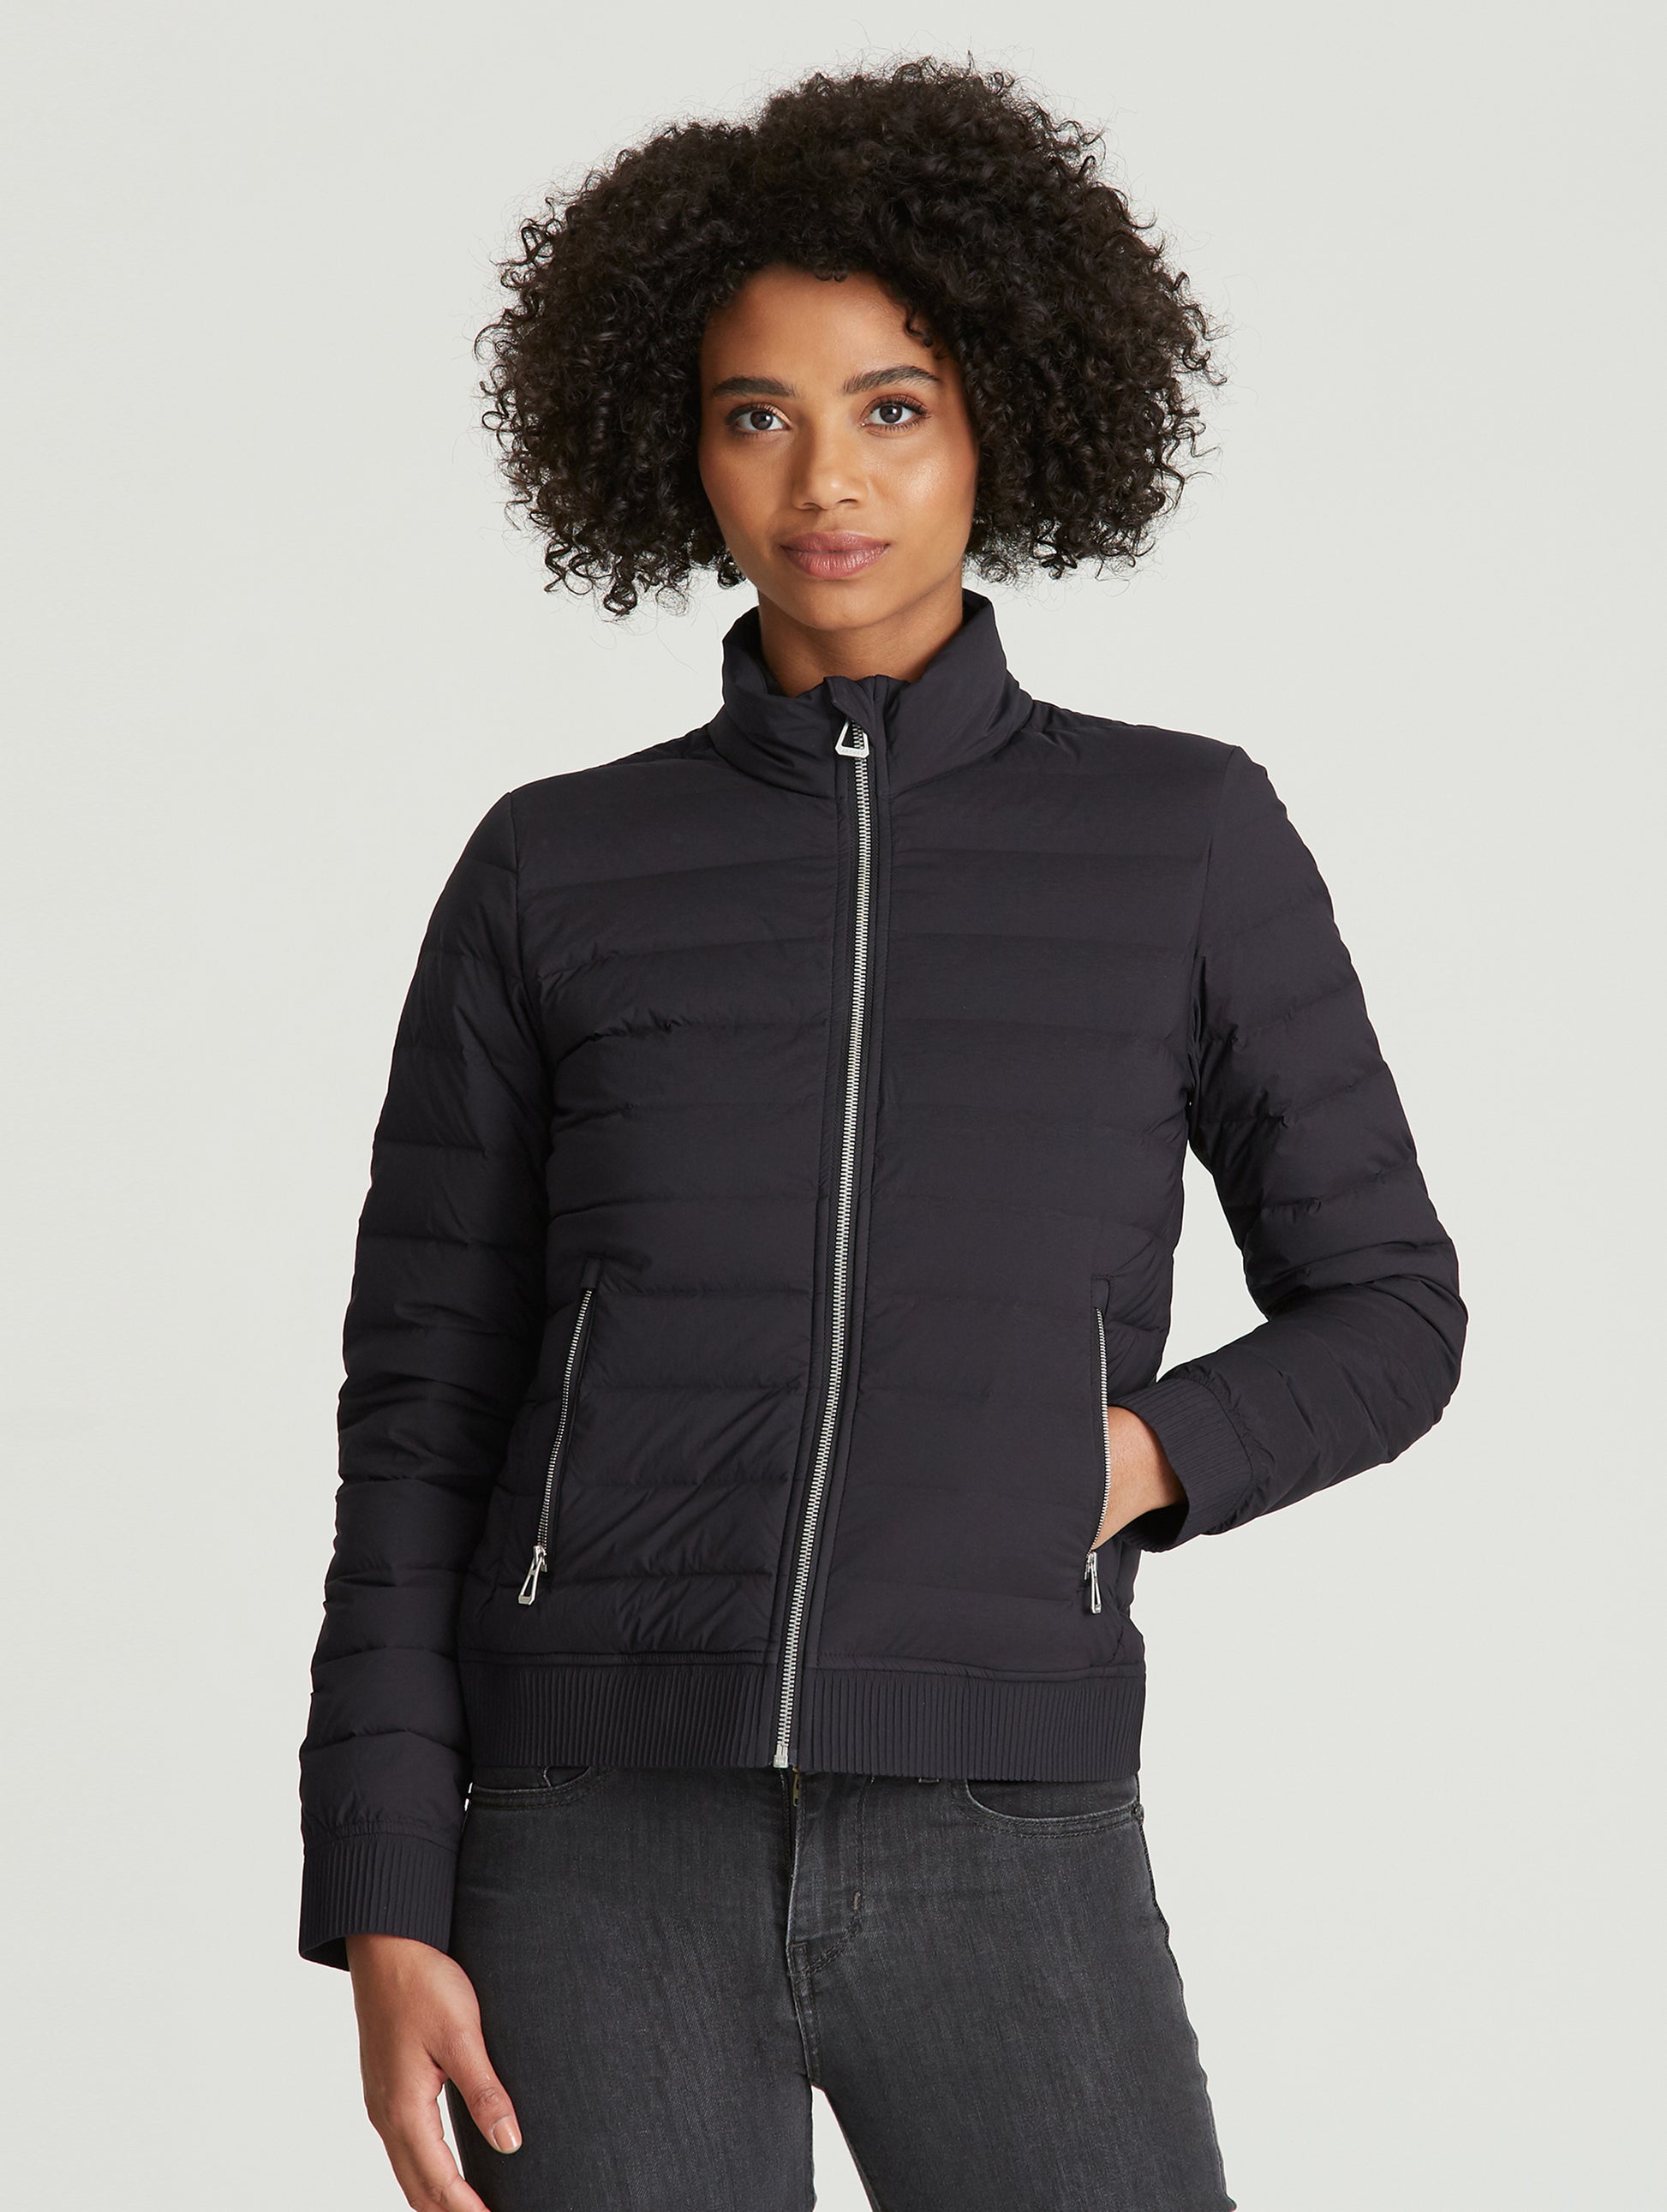 insulated jackets for women from Aether Apparel